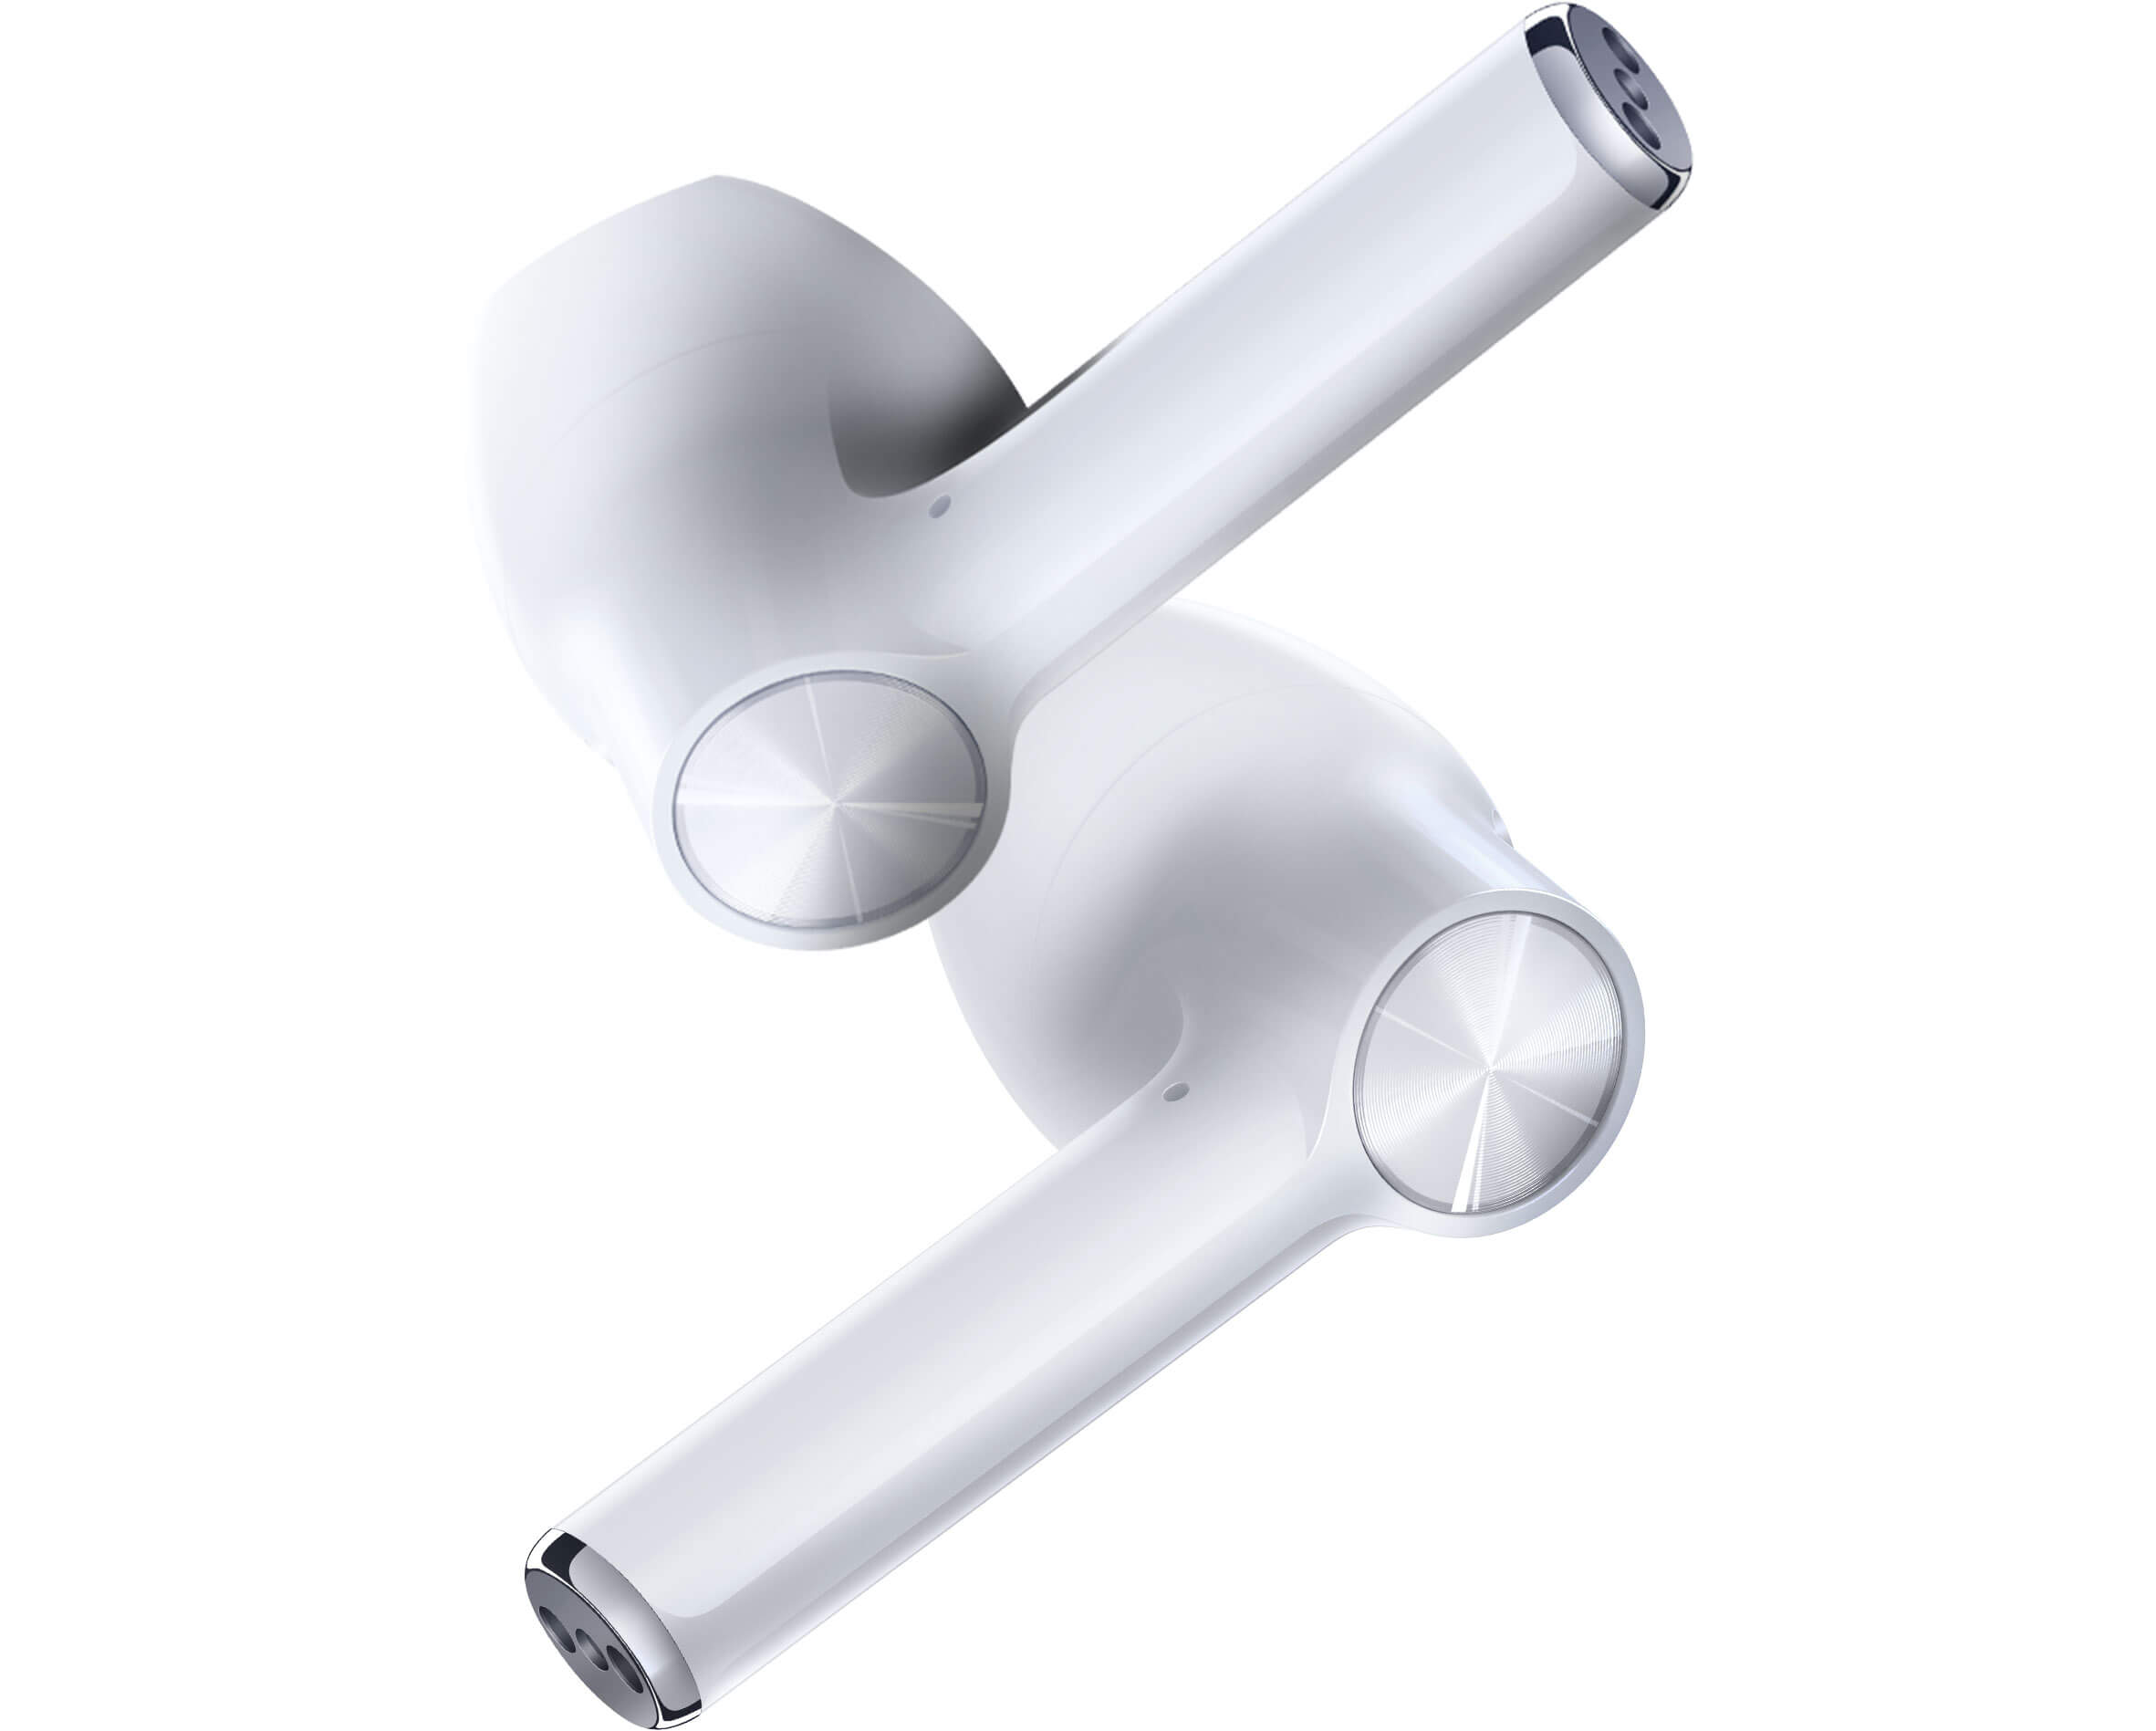 OnePlus Buds – a $79 AirPods competitor